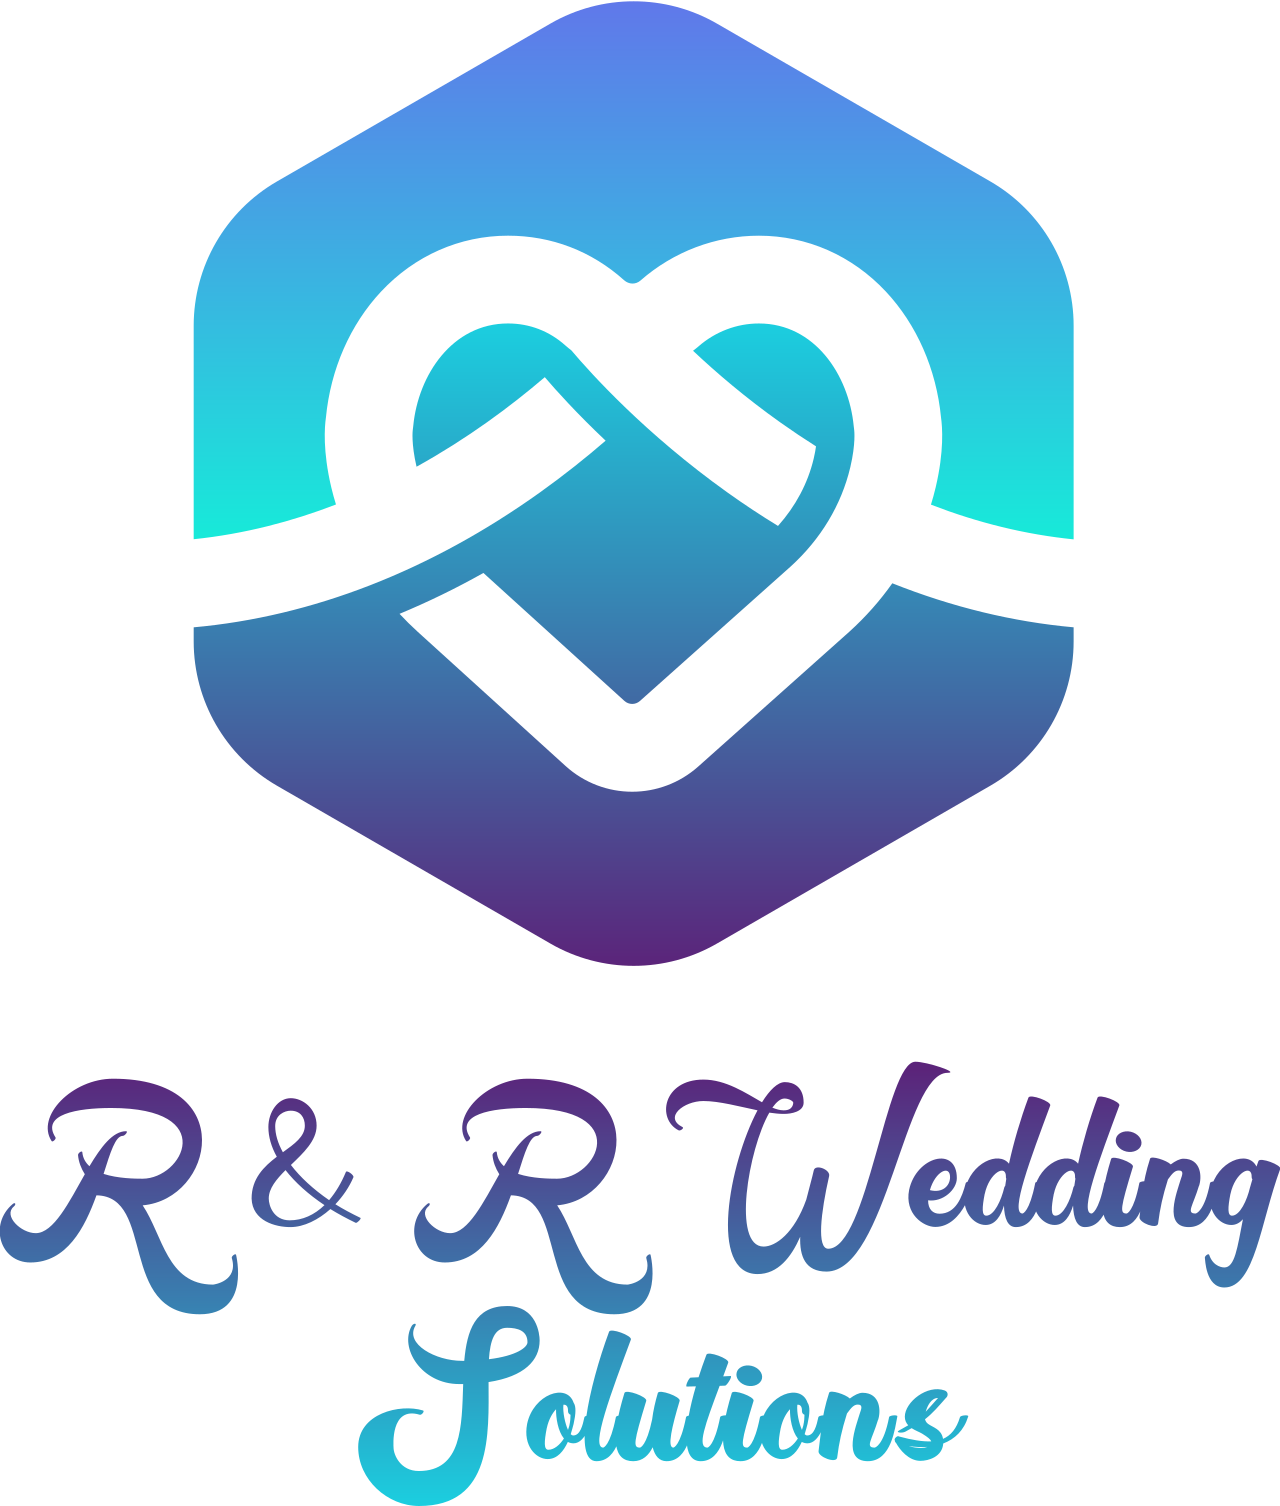 R & R Event Solutions's web page